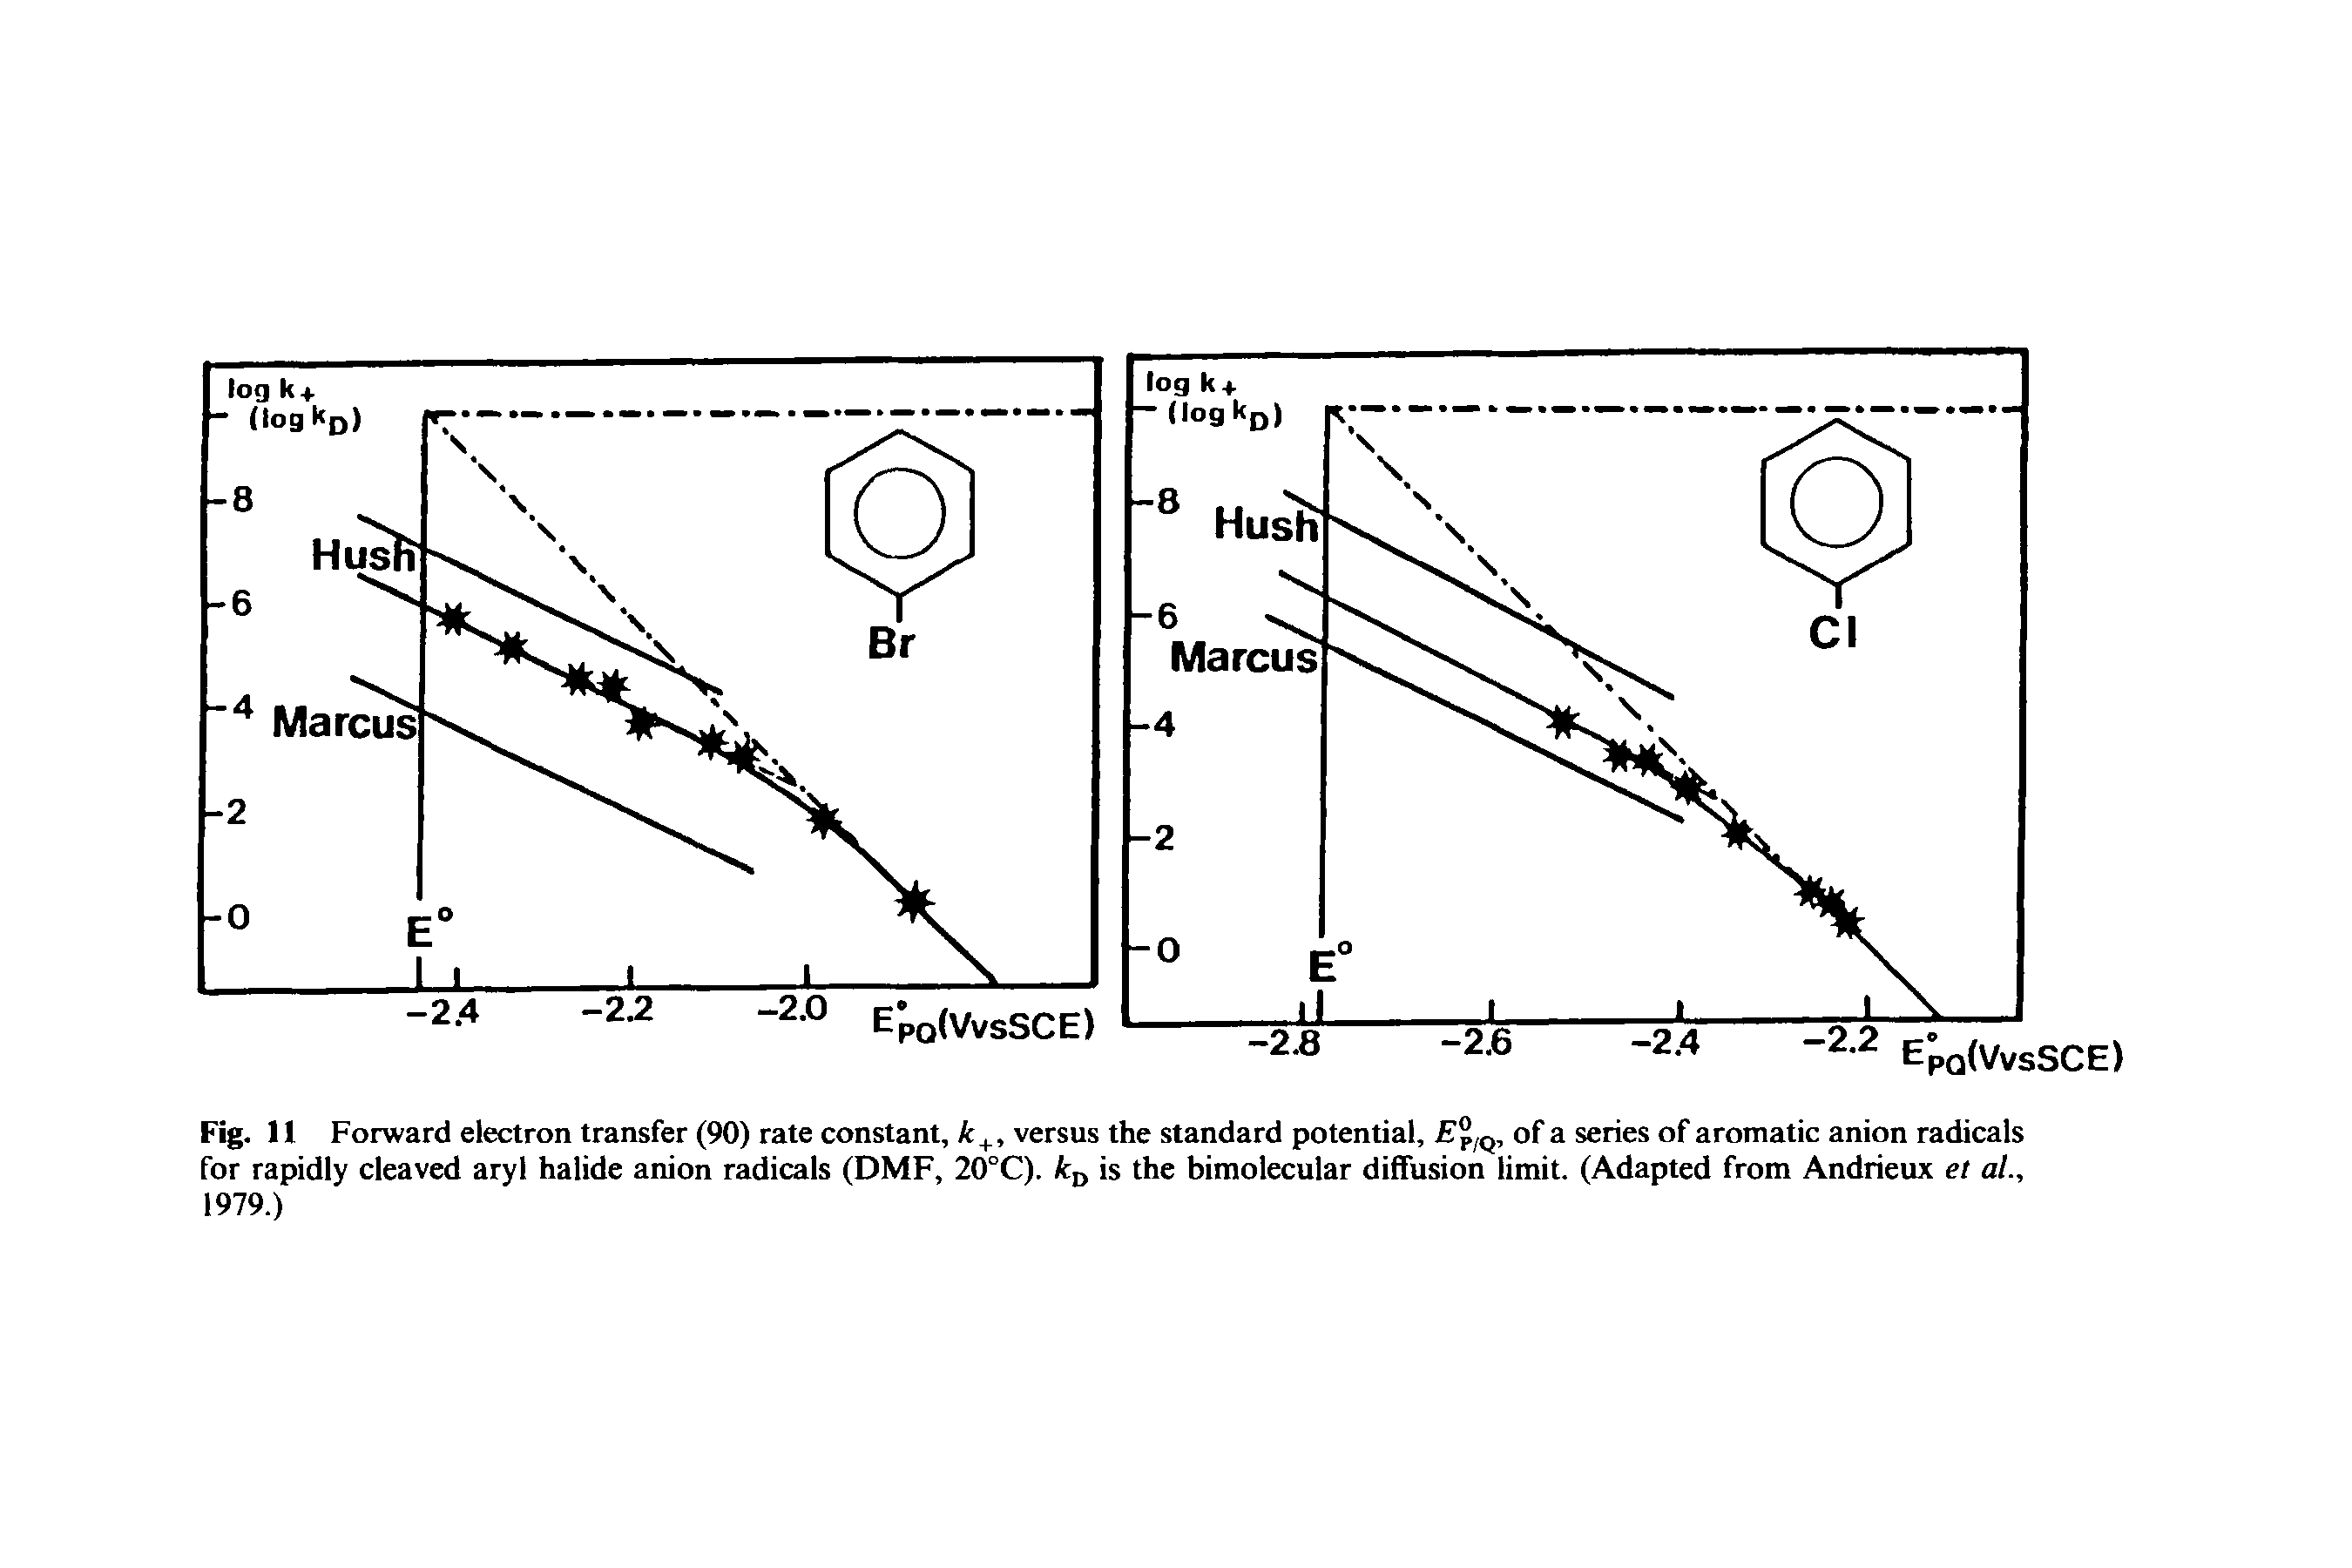 Fig. 11 Forward electron transfer (90) rate constant, k, versus the standard potential, F /q, of a series of aromatic anion radicals for rapidly cleaved aryl halide anion radicals (DMF, 20°C). kjy is the bimolecular diffusion limit. (Adapted from Andrieux et al., 1979.)...